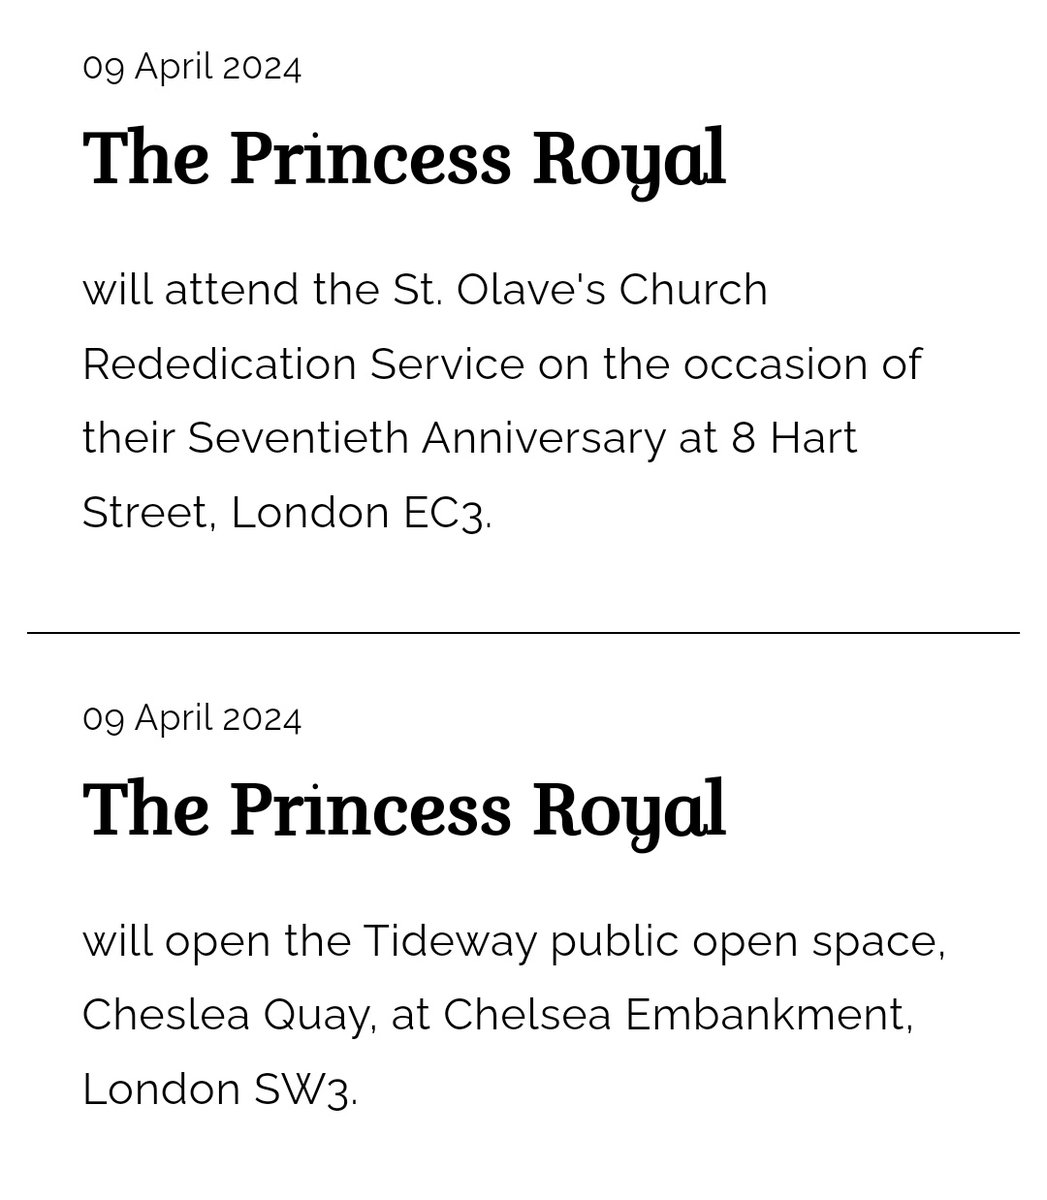 #PrincessAnne 
#ThePrincessRoyal 
#RoyalFamily 
‼️ Princess Anne 👸🏻 today's engagement.

👉 Attend the St. Olave's Church Rededication Service
👉 Open the Tideway public open space